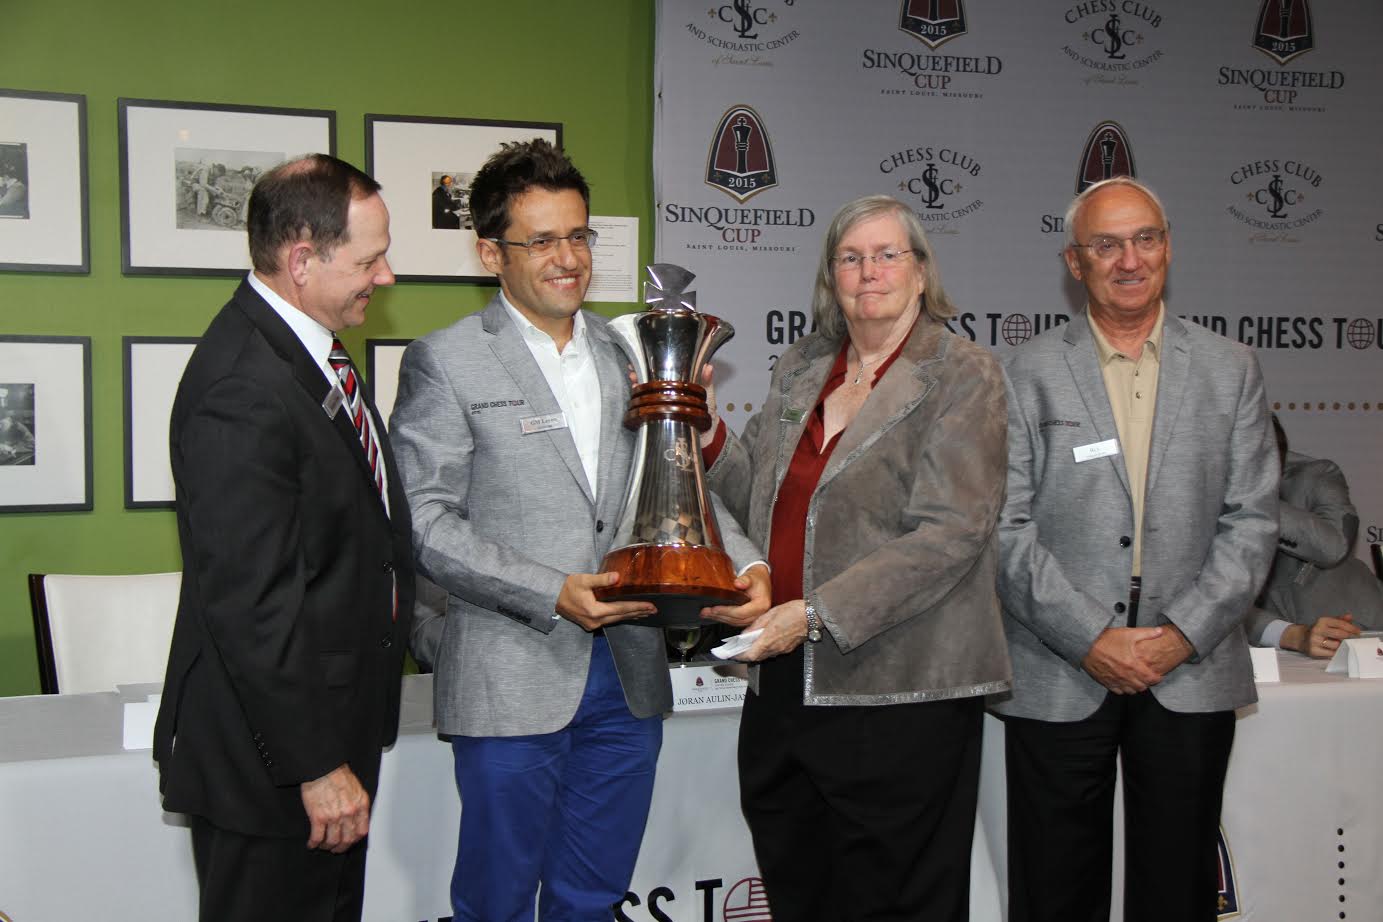 Mayor Francis Slay, Sinq Cup Champ Levon Aronian, Rex and Jeanne Sinquefield, Photo Cathy Rogers